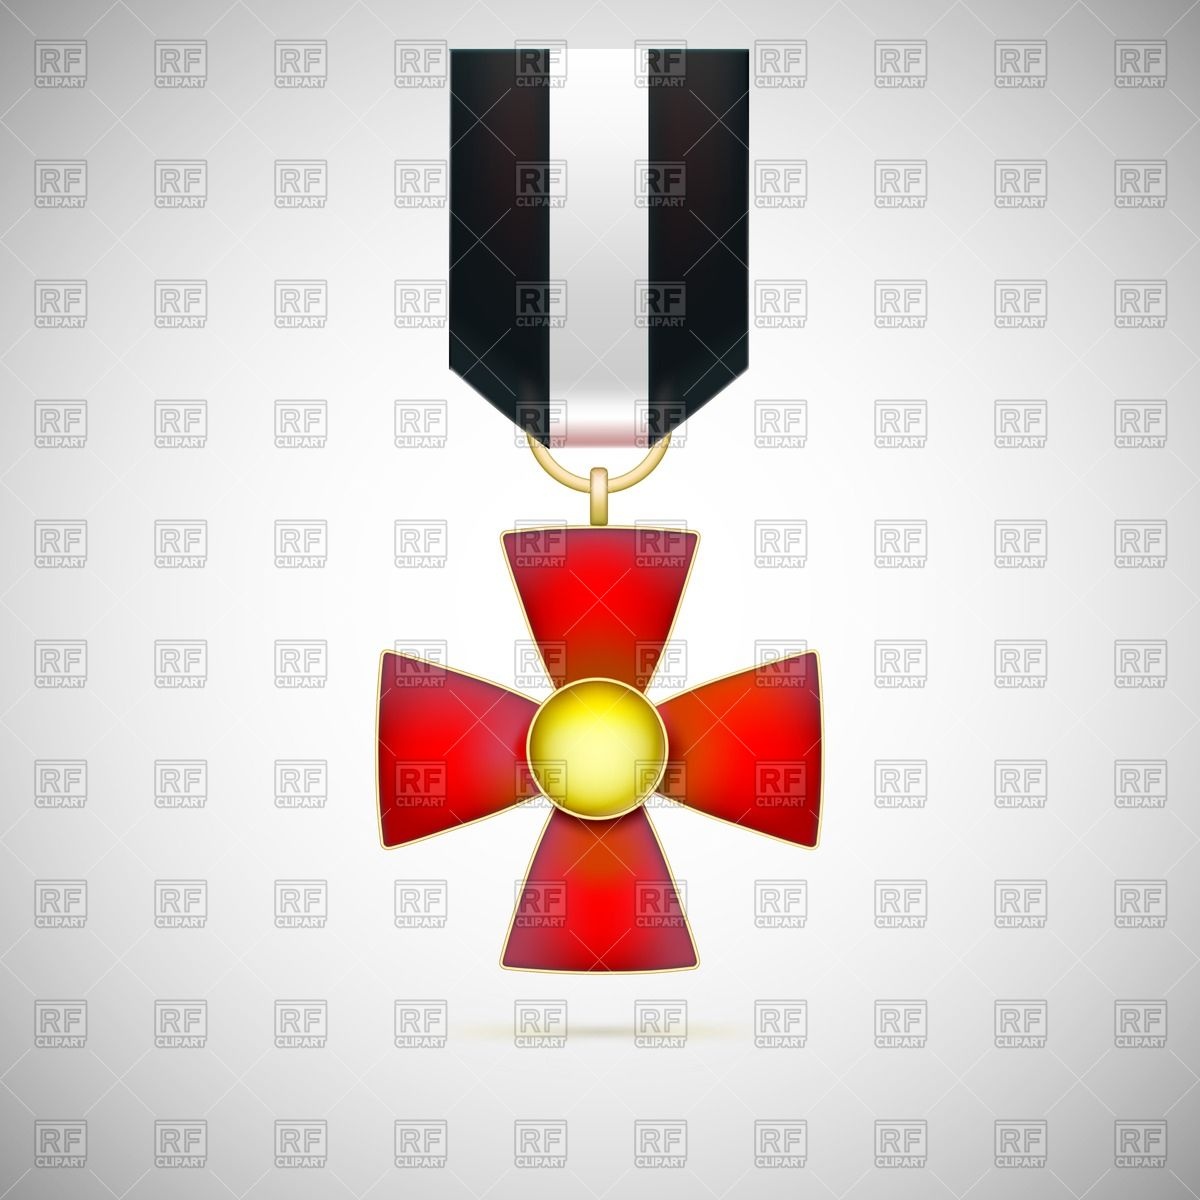 Red Cross On Black And White Striped Ribbon   Military Medal Of